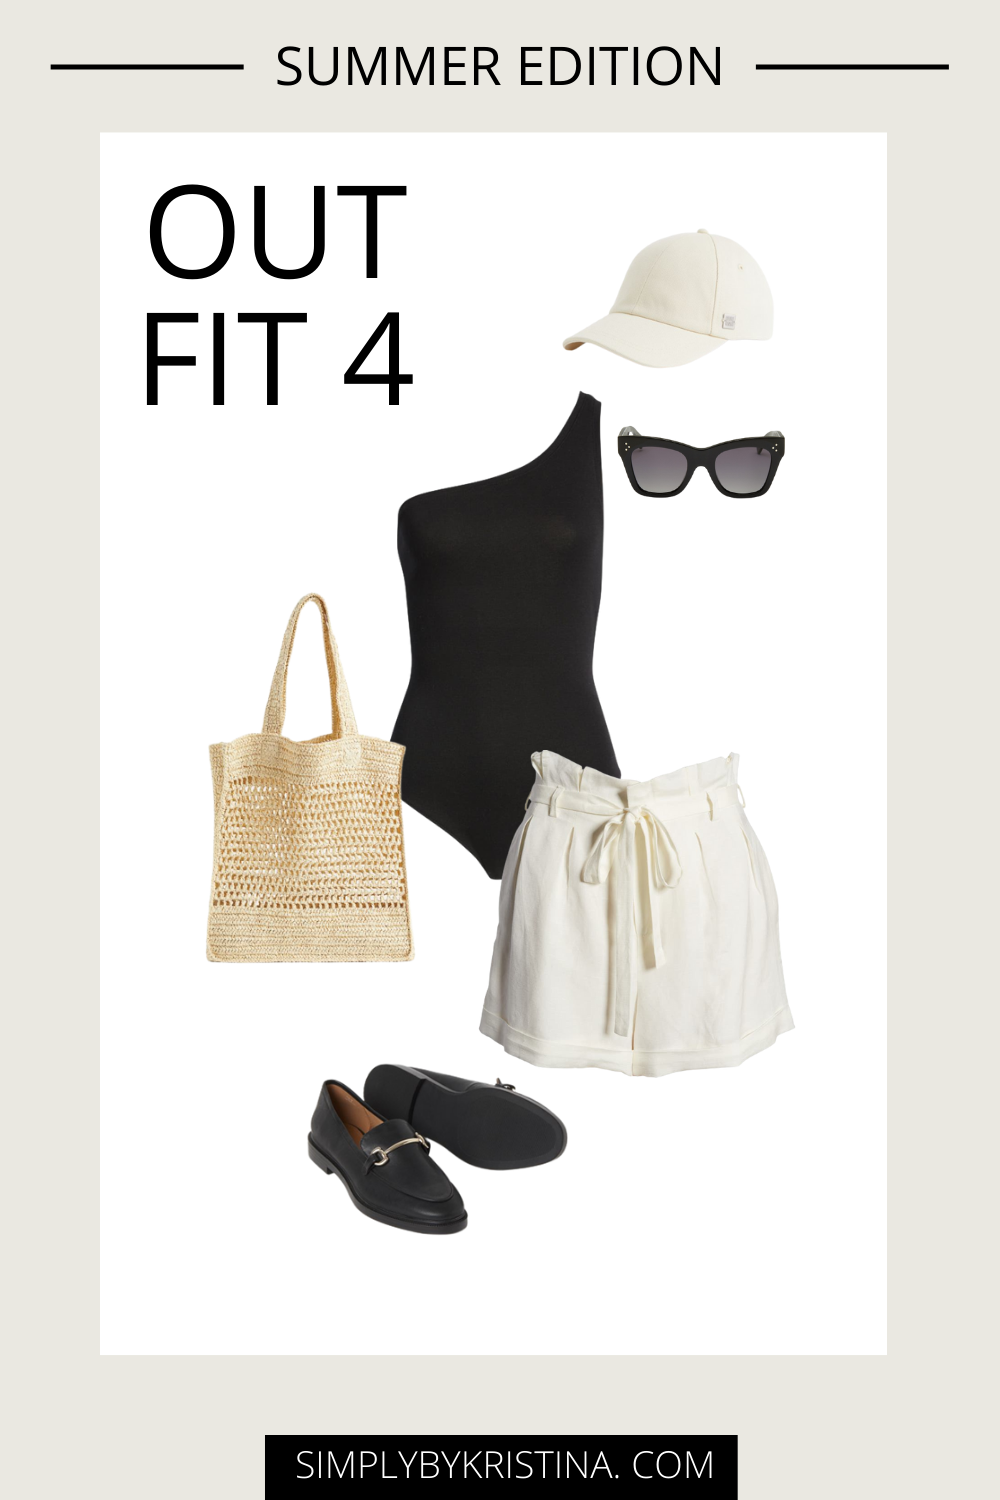 Key Staples For A Capsule Wardrobe: Summer Edition